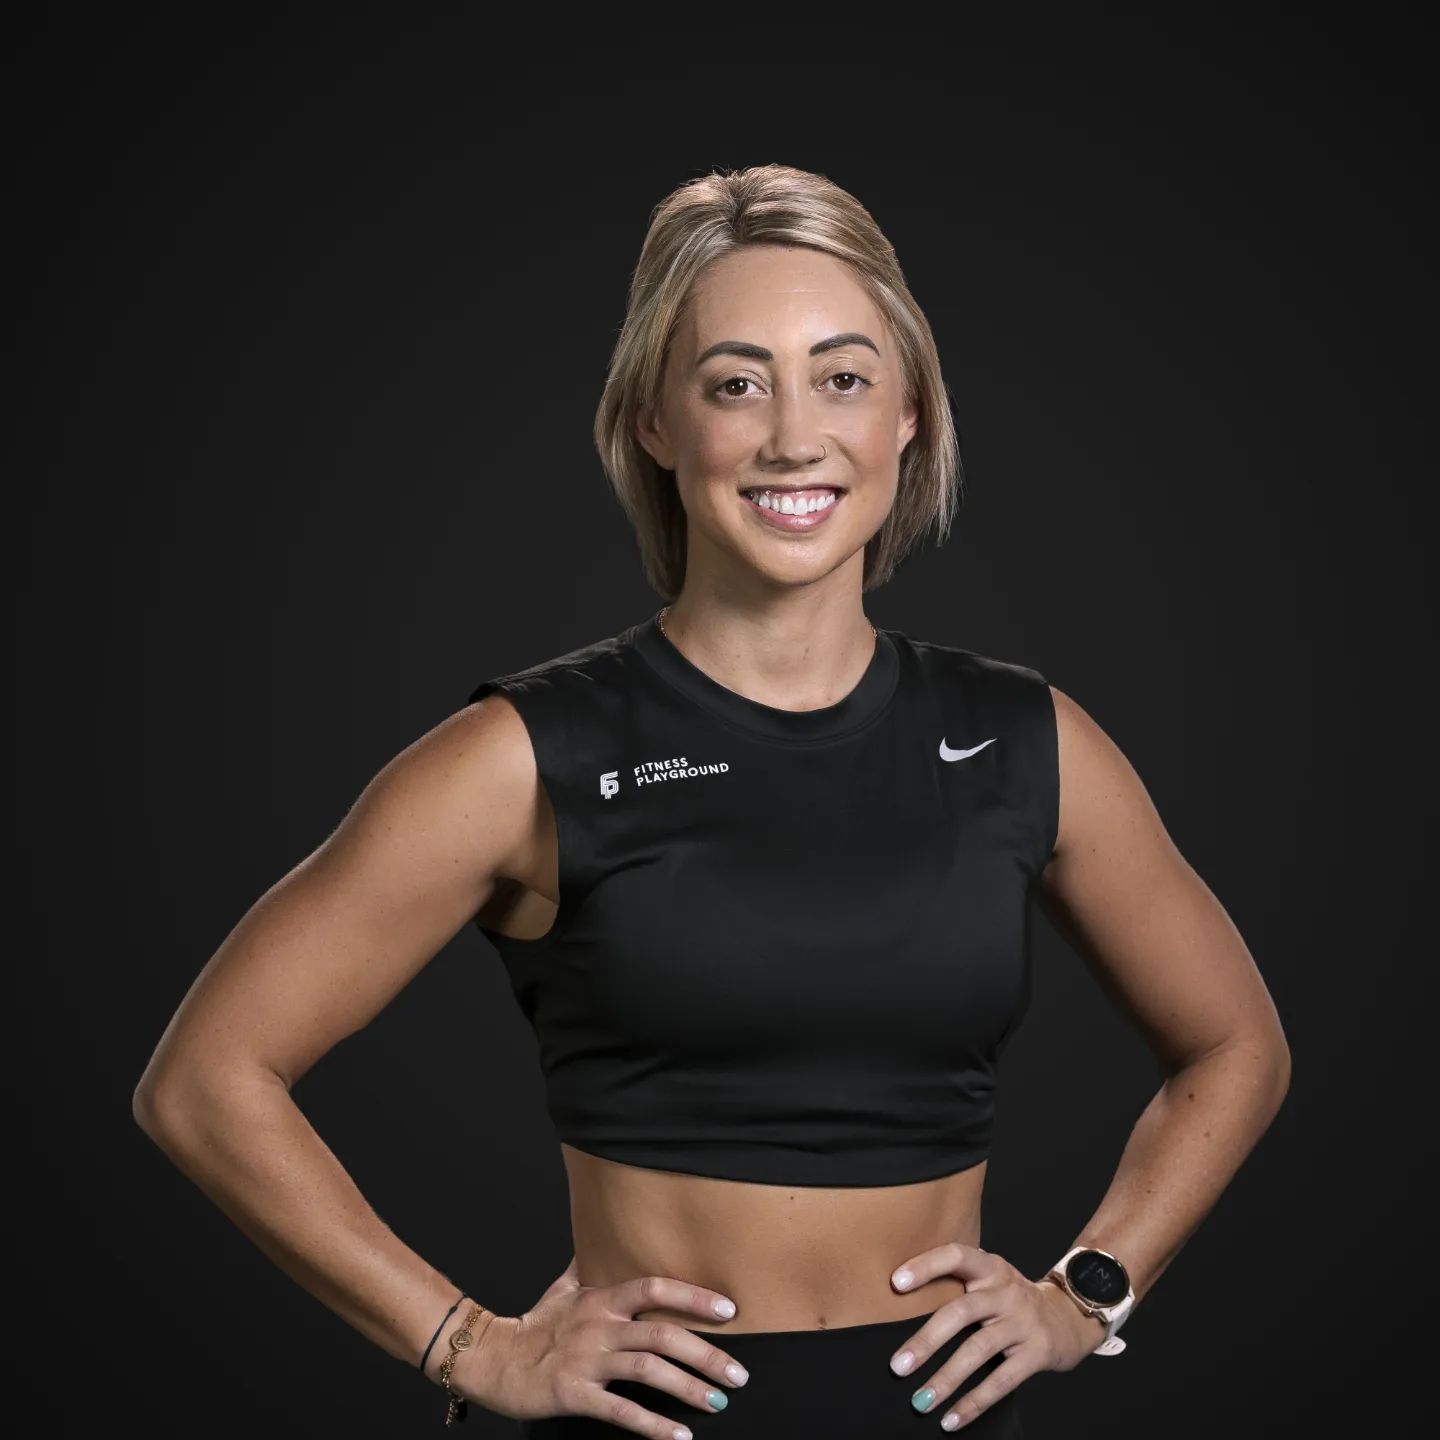 You Got This: Perth personal trainer on being curvy instructor